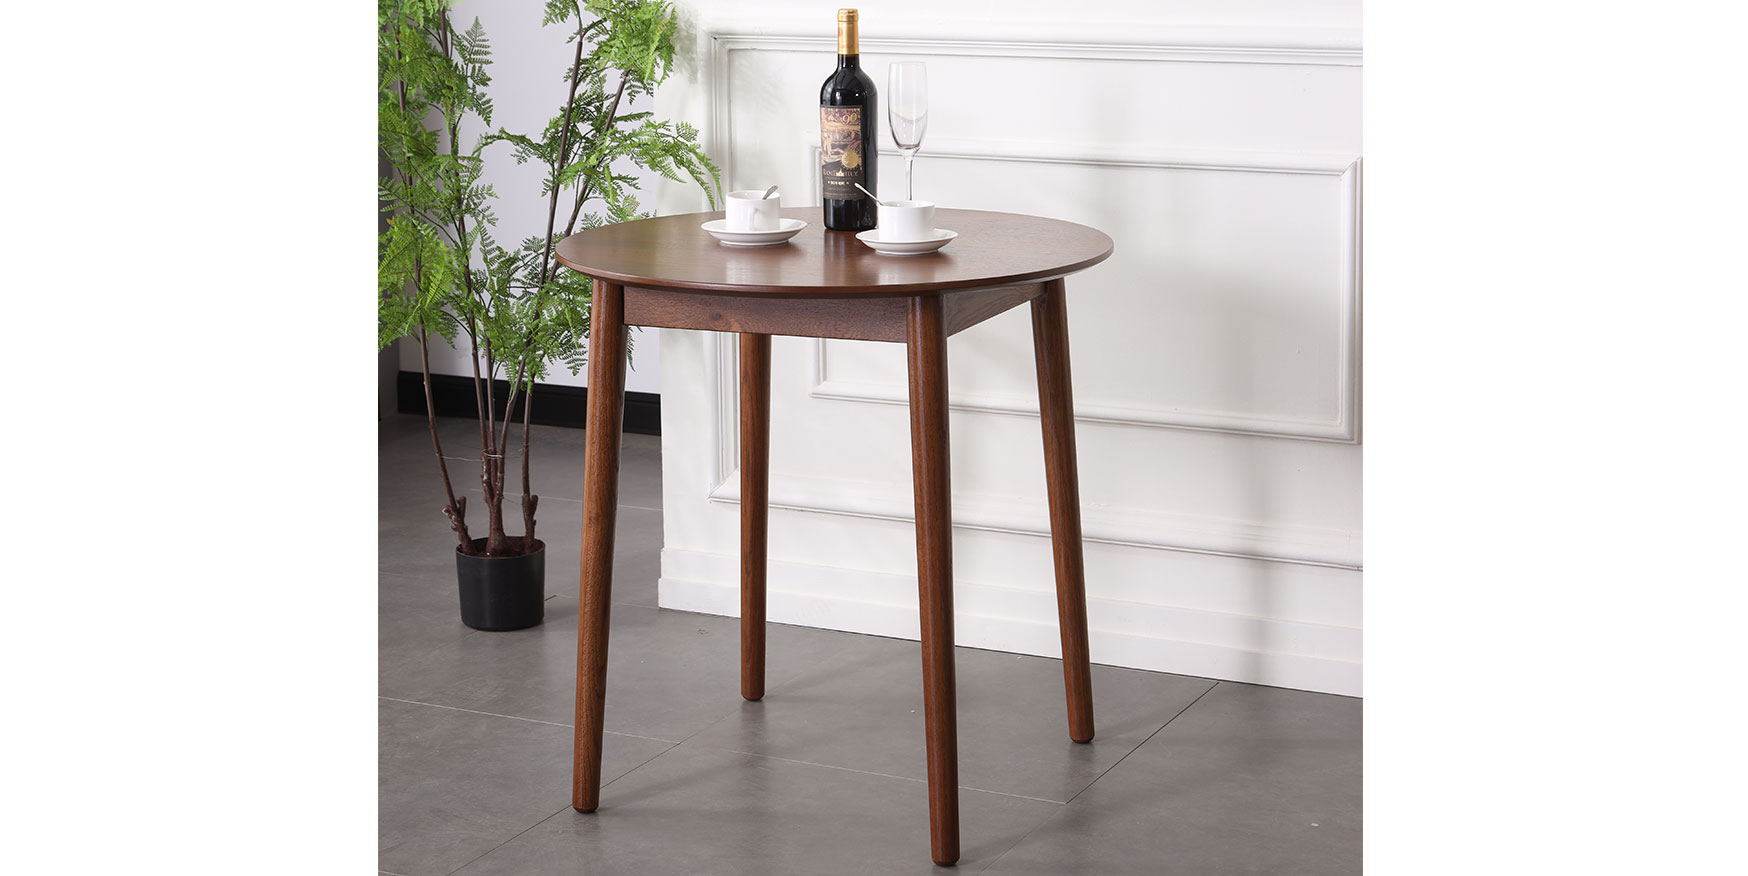 DT3-R Dining Table Modern Nordic Wooden Table Bar Table